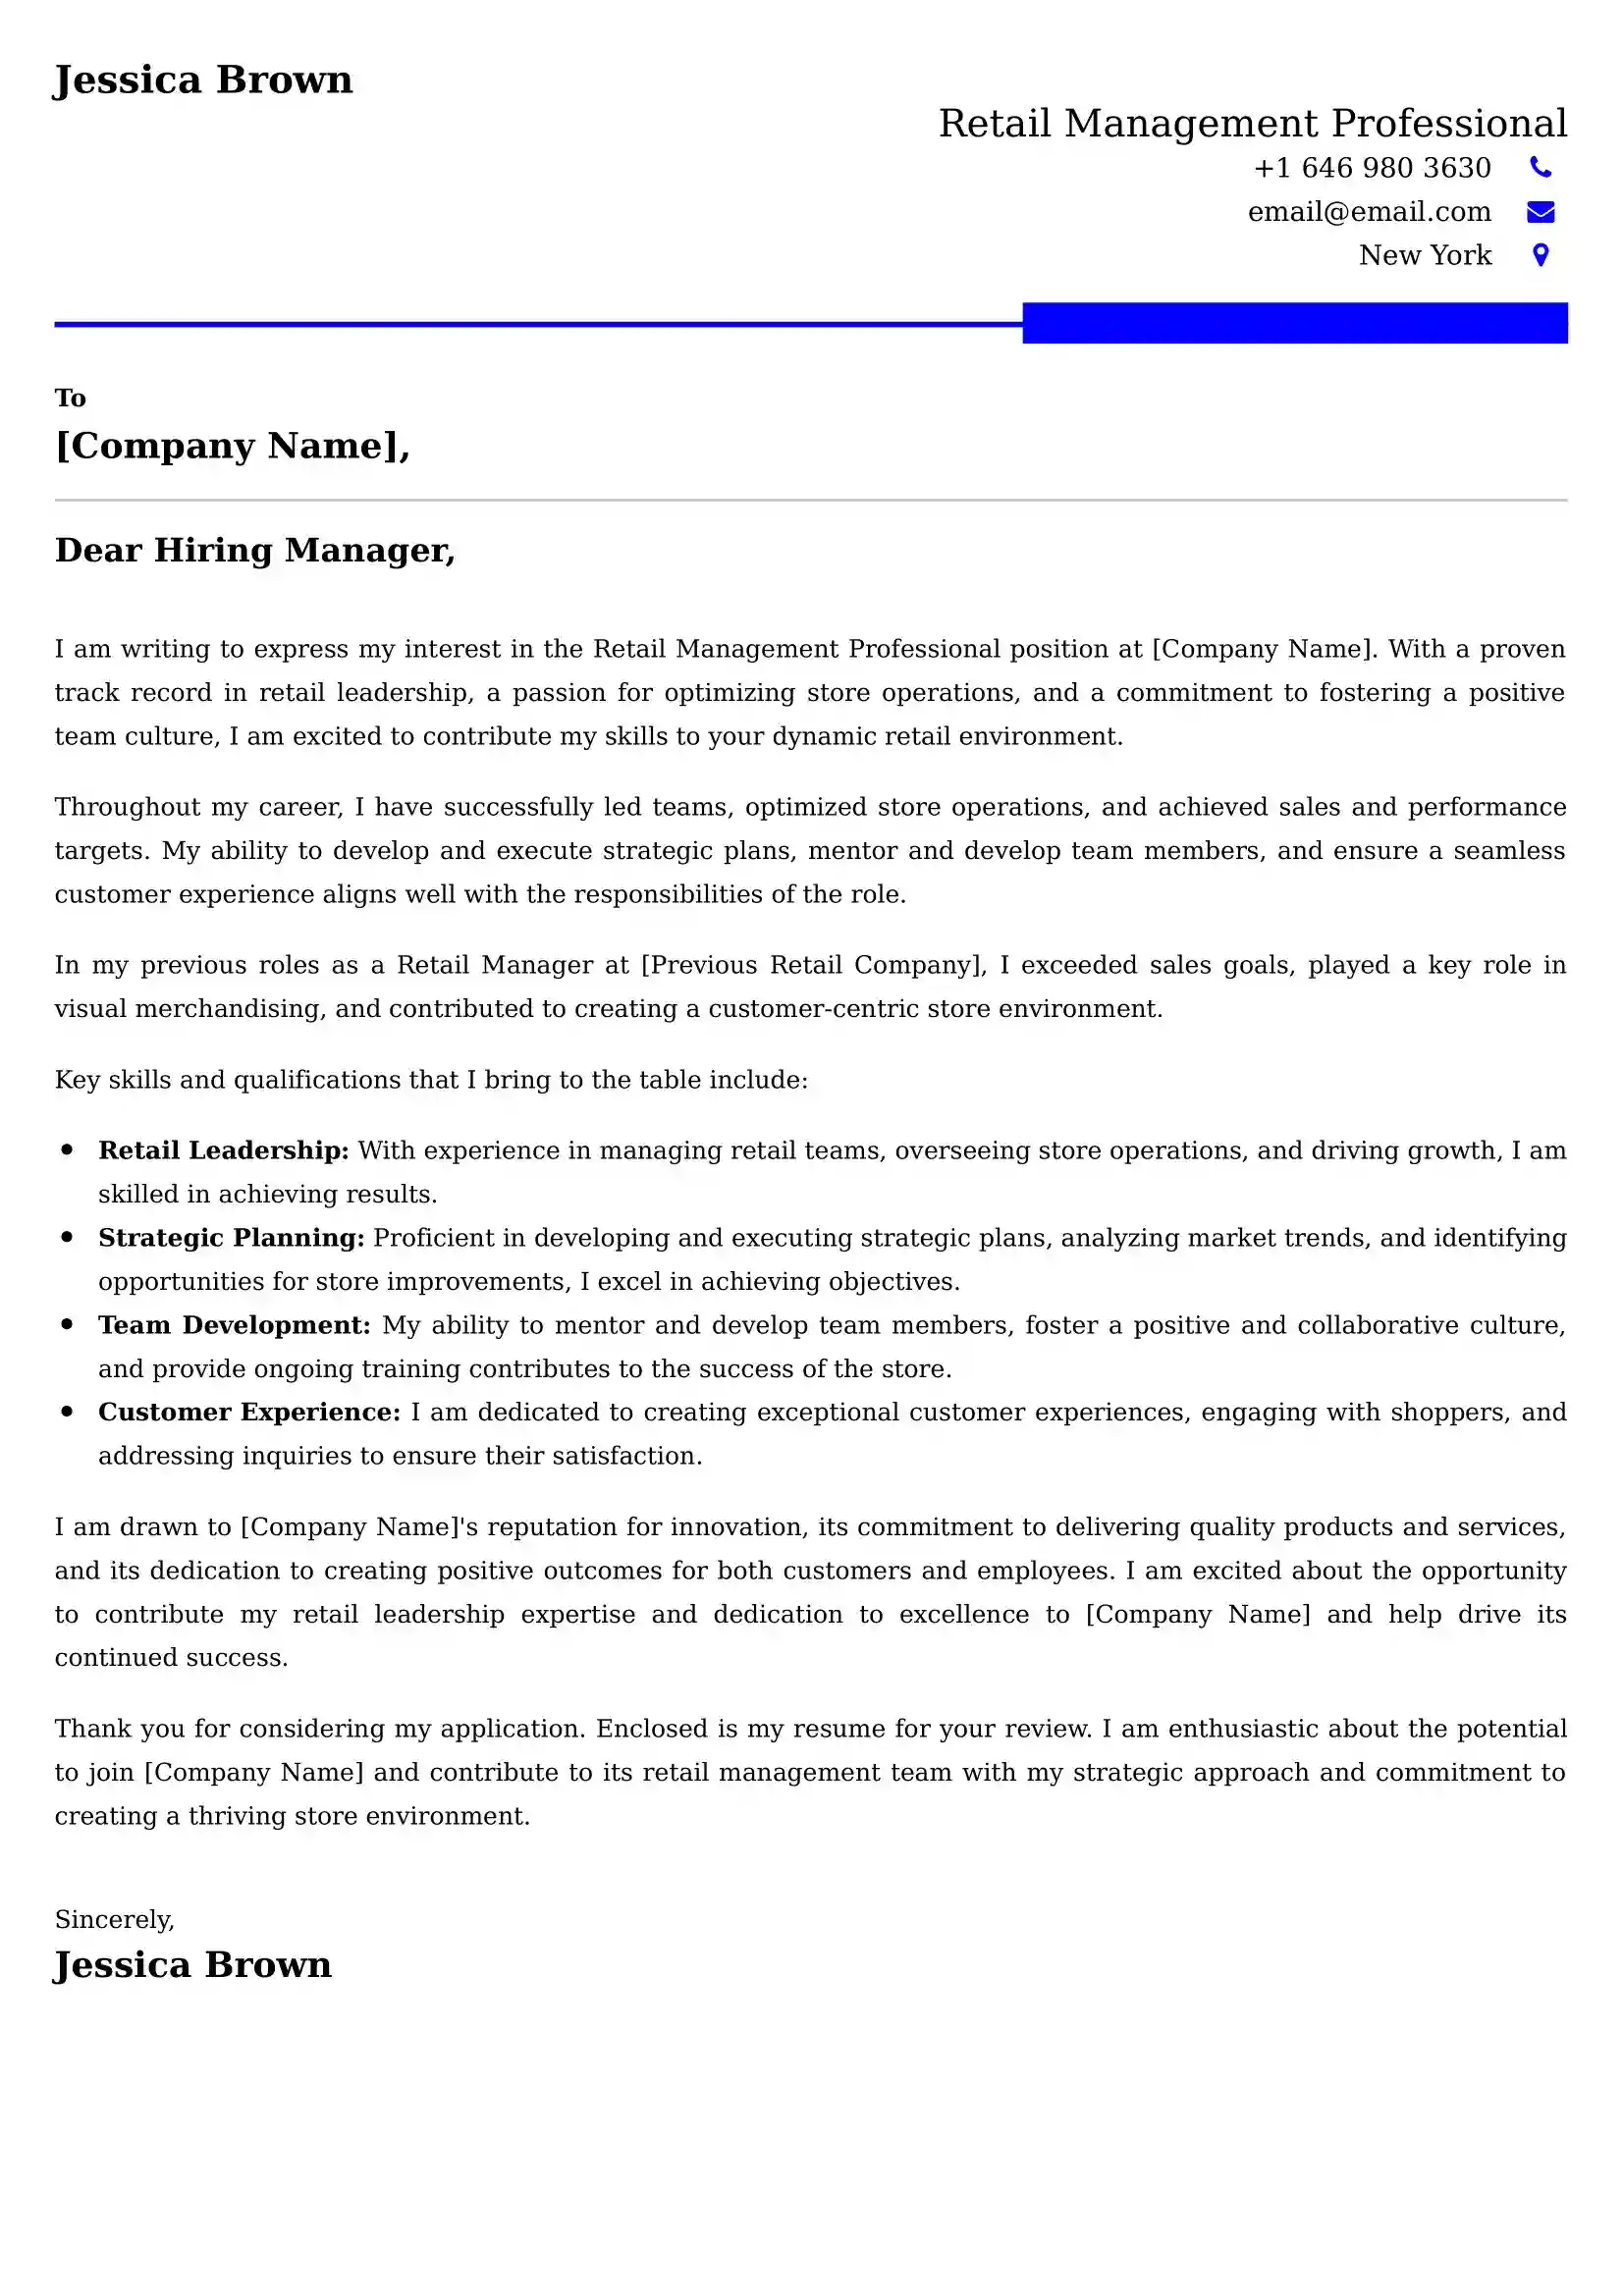 Retail Management Professional Cover Letter Examples Australia